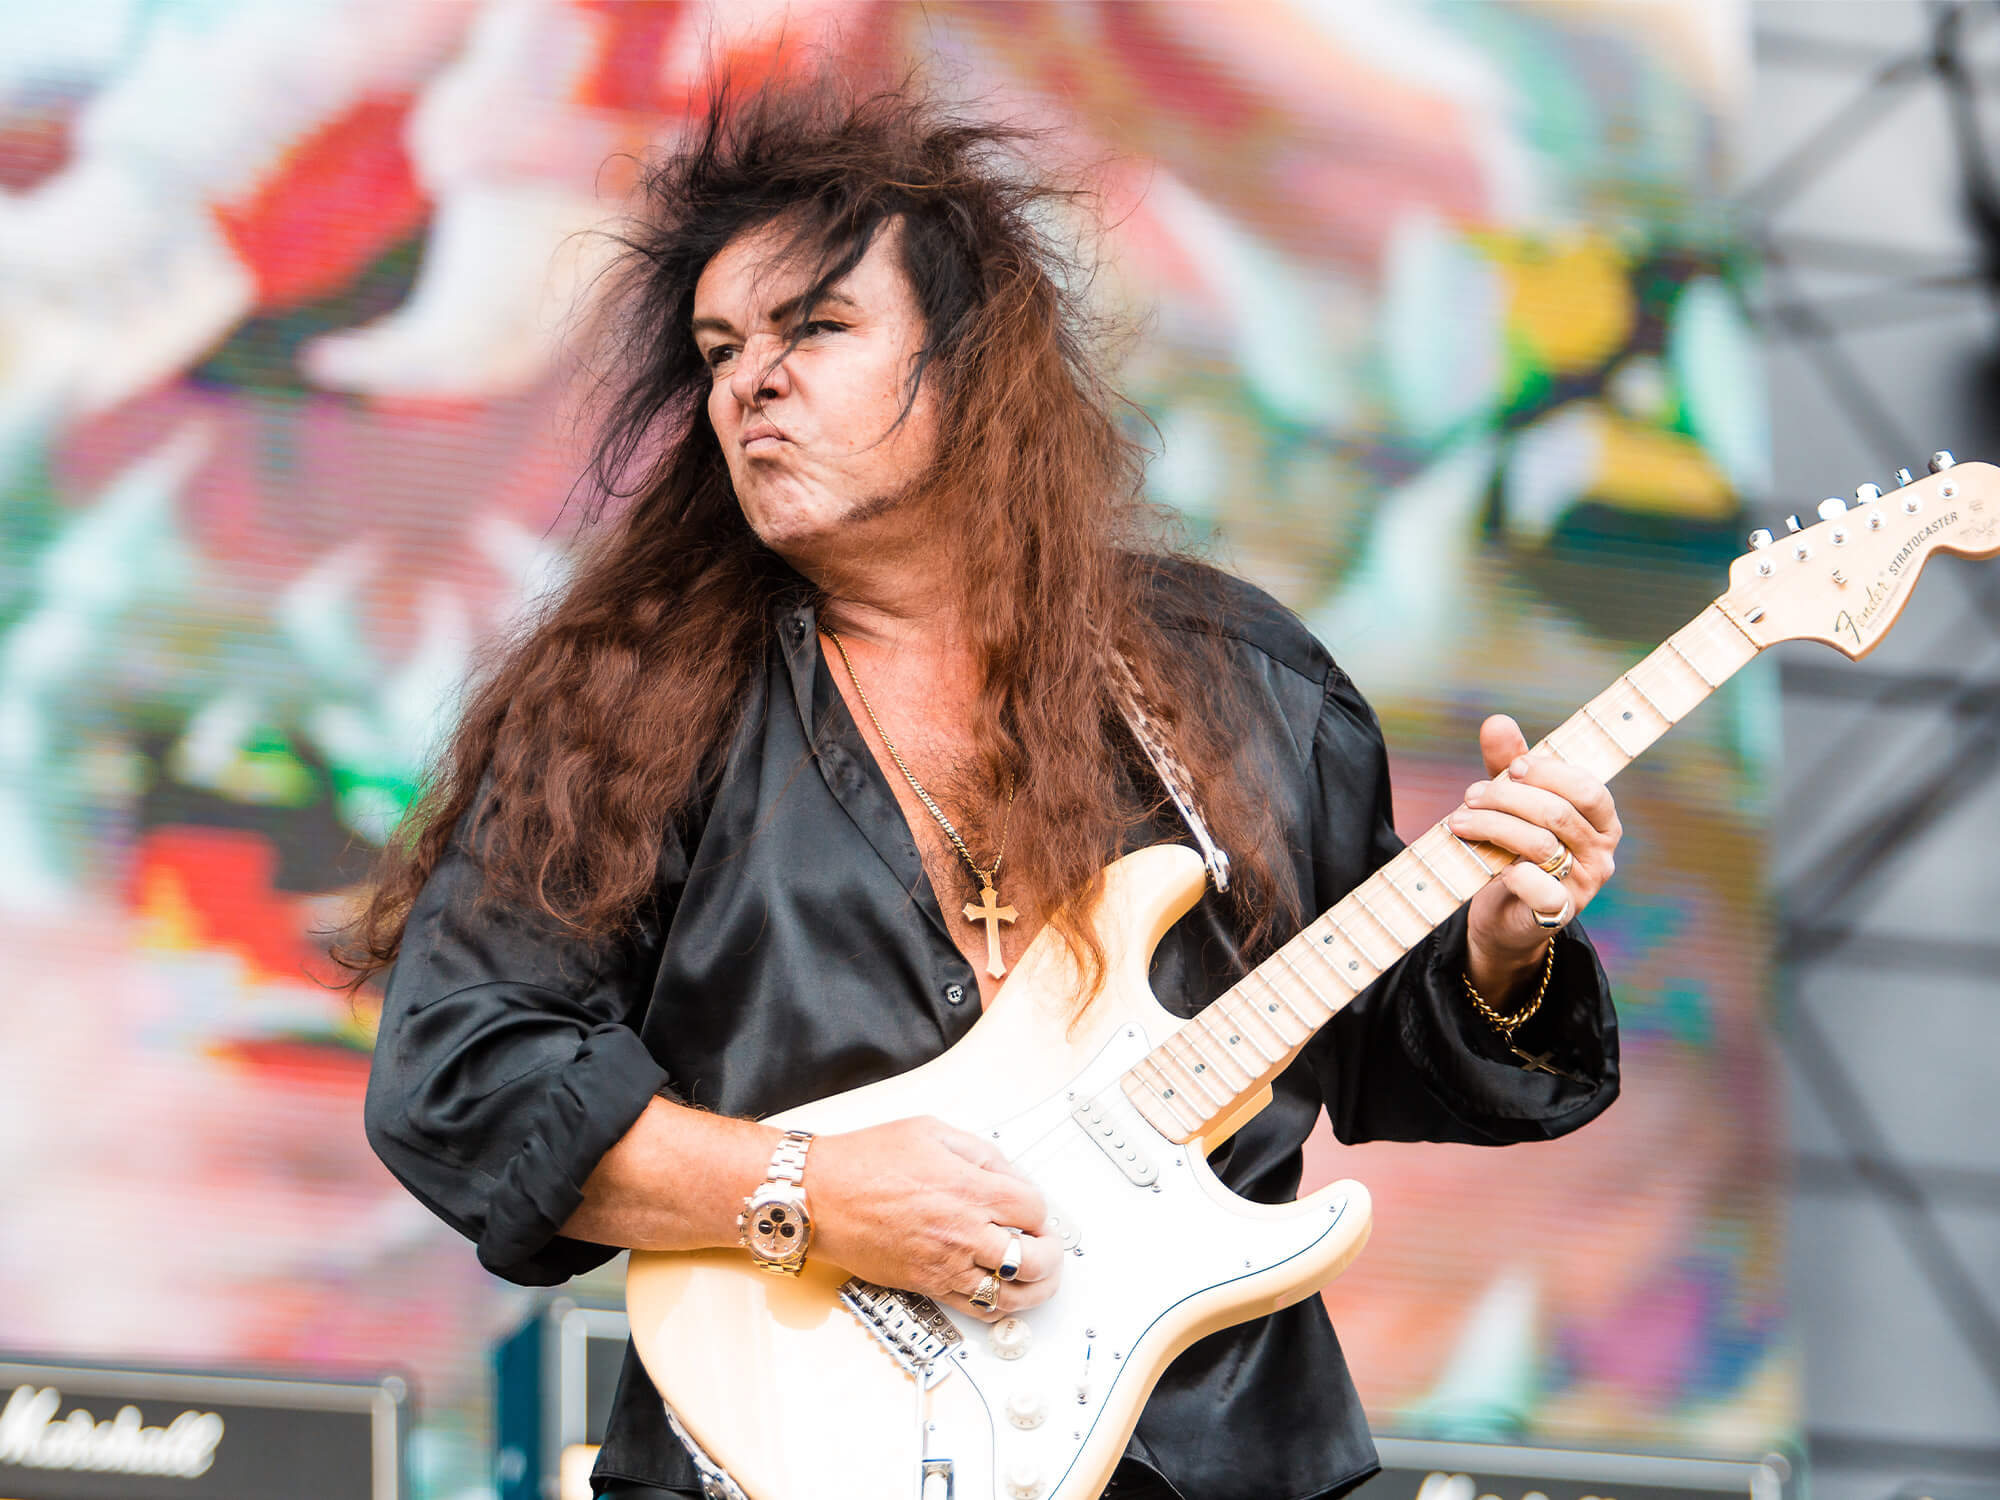 Yngwie Malmsteen on stage. He plays a white Strat and is pouting as he plays.